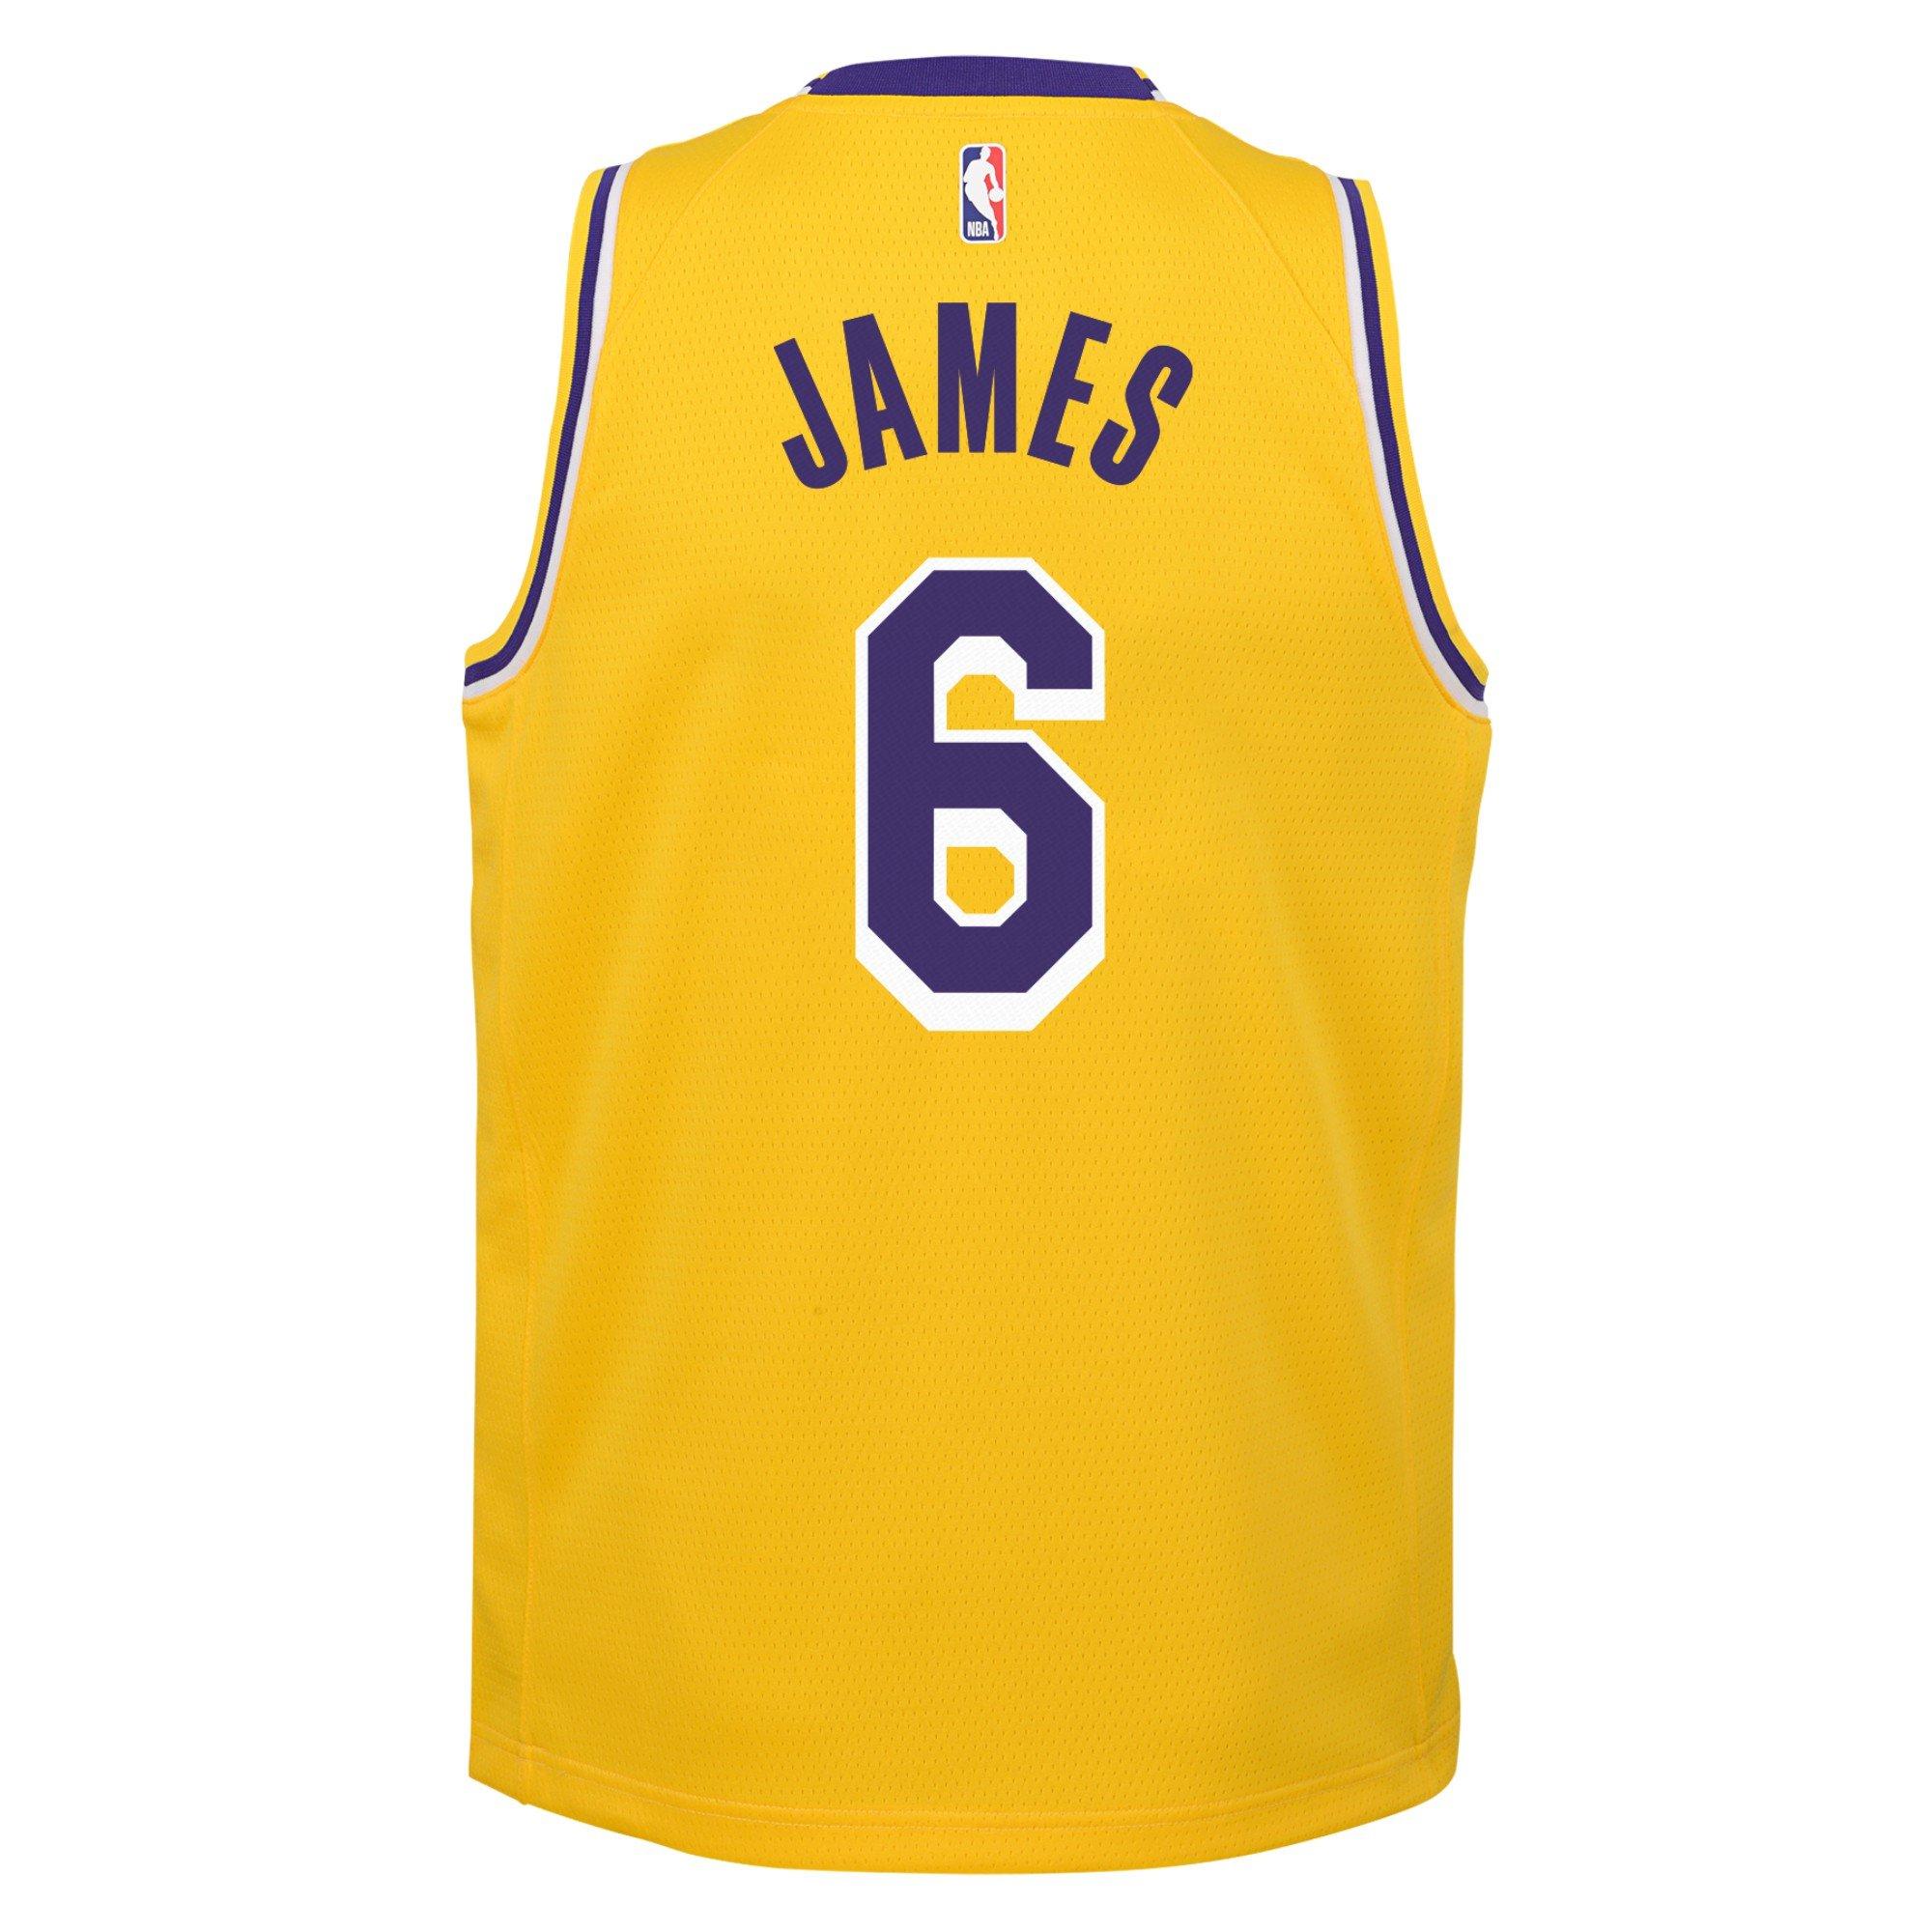 og lakers jersey